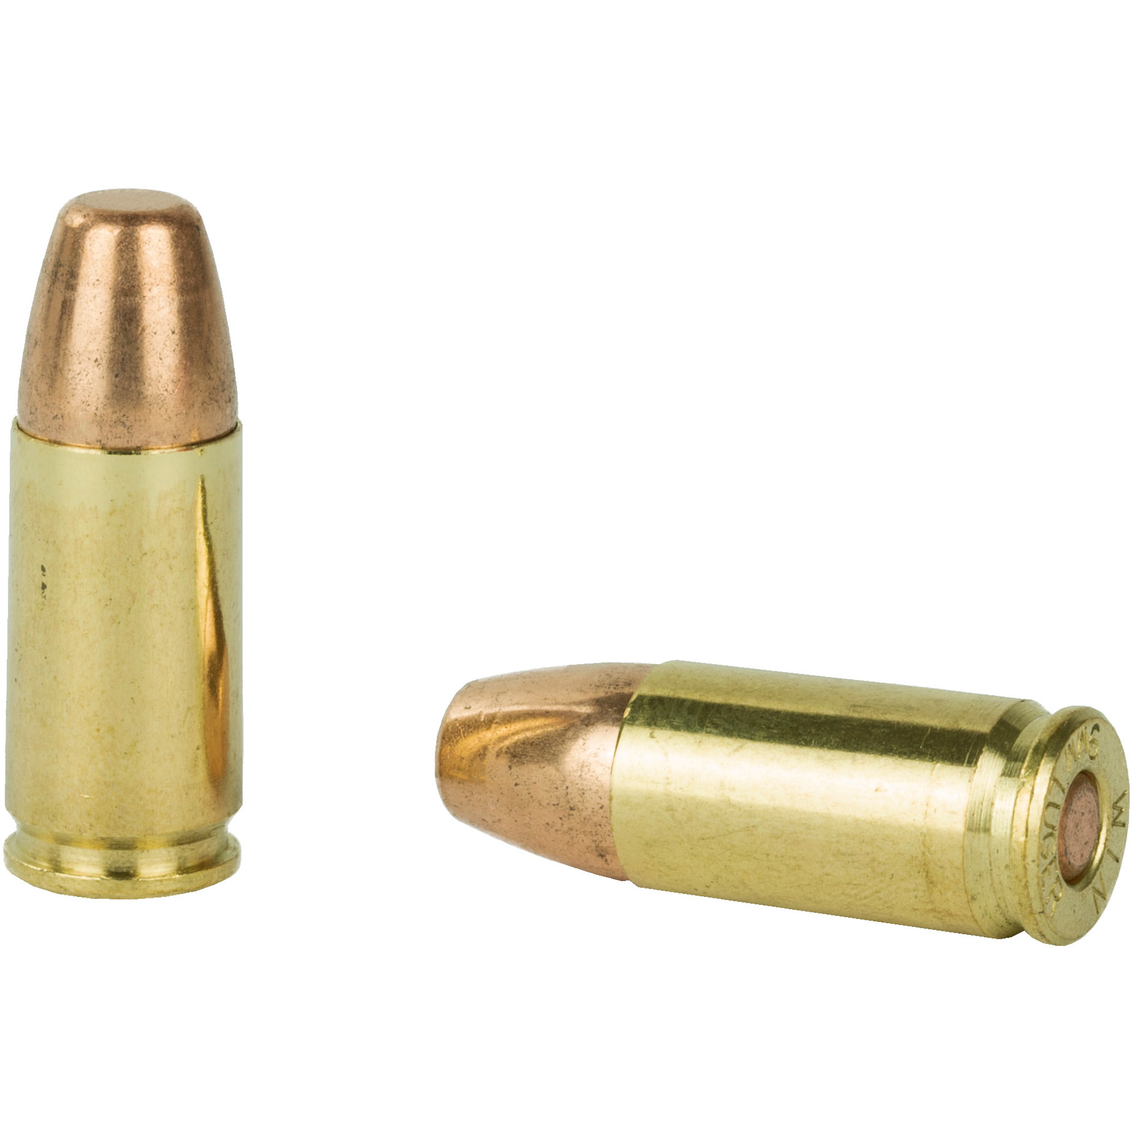 Winchester USA Ready 9mm 115 Gr. FMJ 50 Rounds - Image 4 of 4